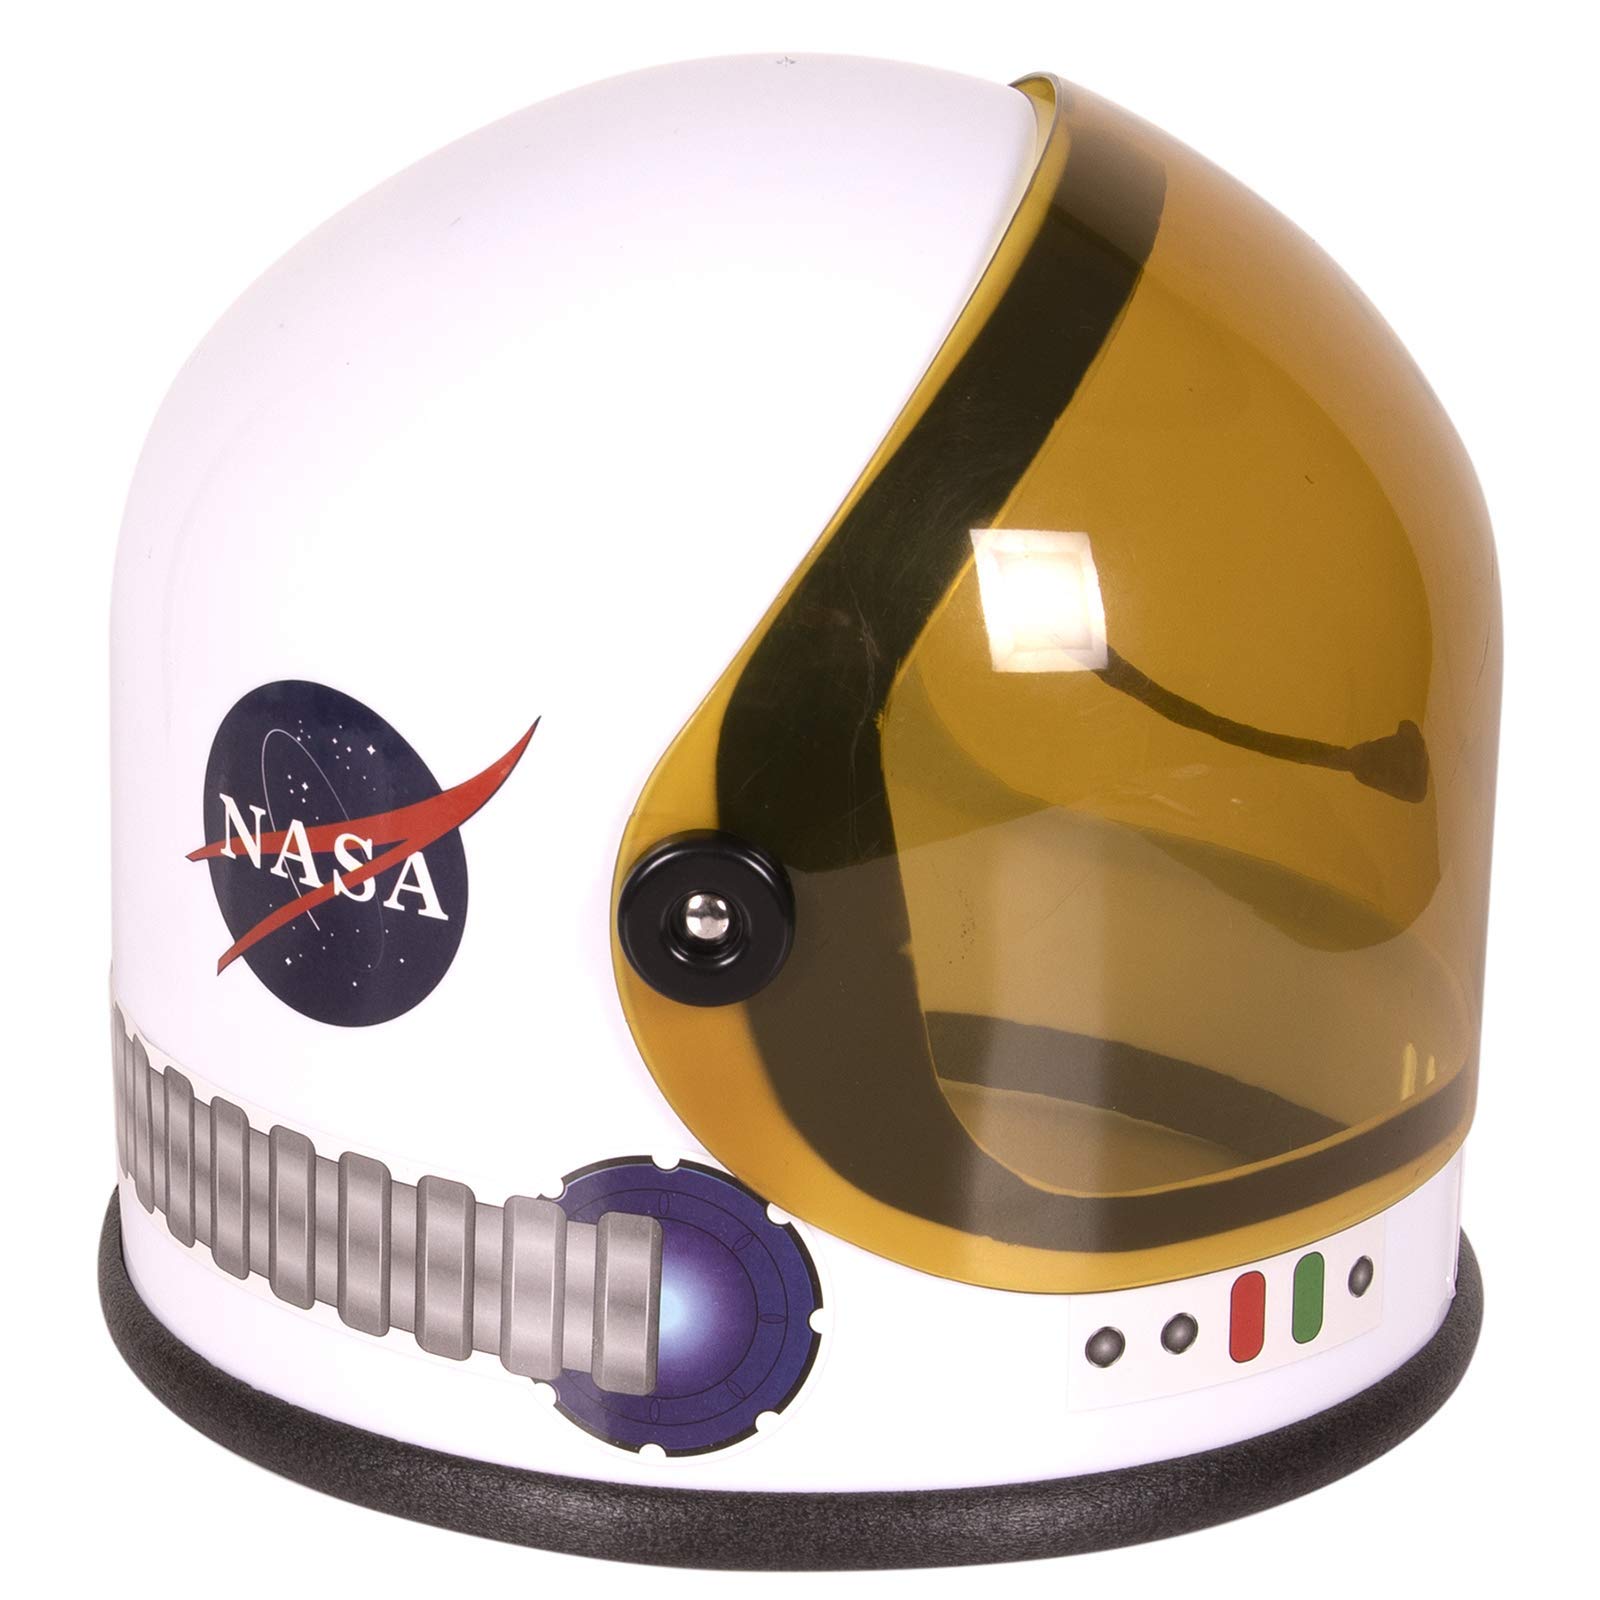 Astronaut Helmet with Movable Visor - Pretend & Play Toy for Dress Up Fun, Role Play Accessory, Birthday Party Favor Supplies, Girls, Boys, Kids and Toddler. White